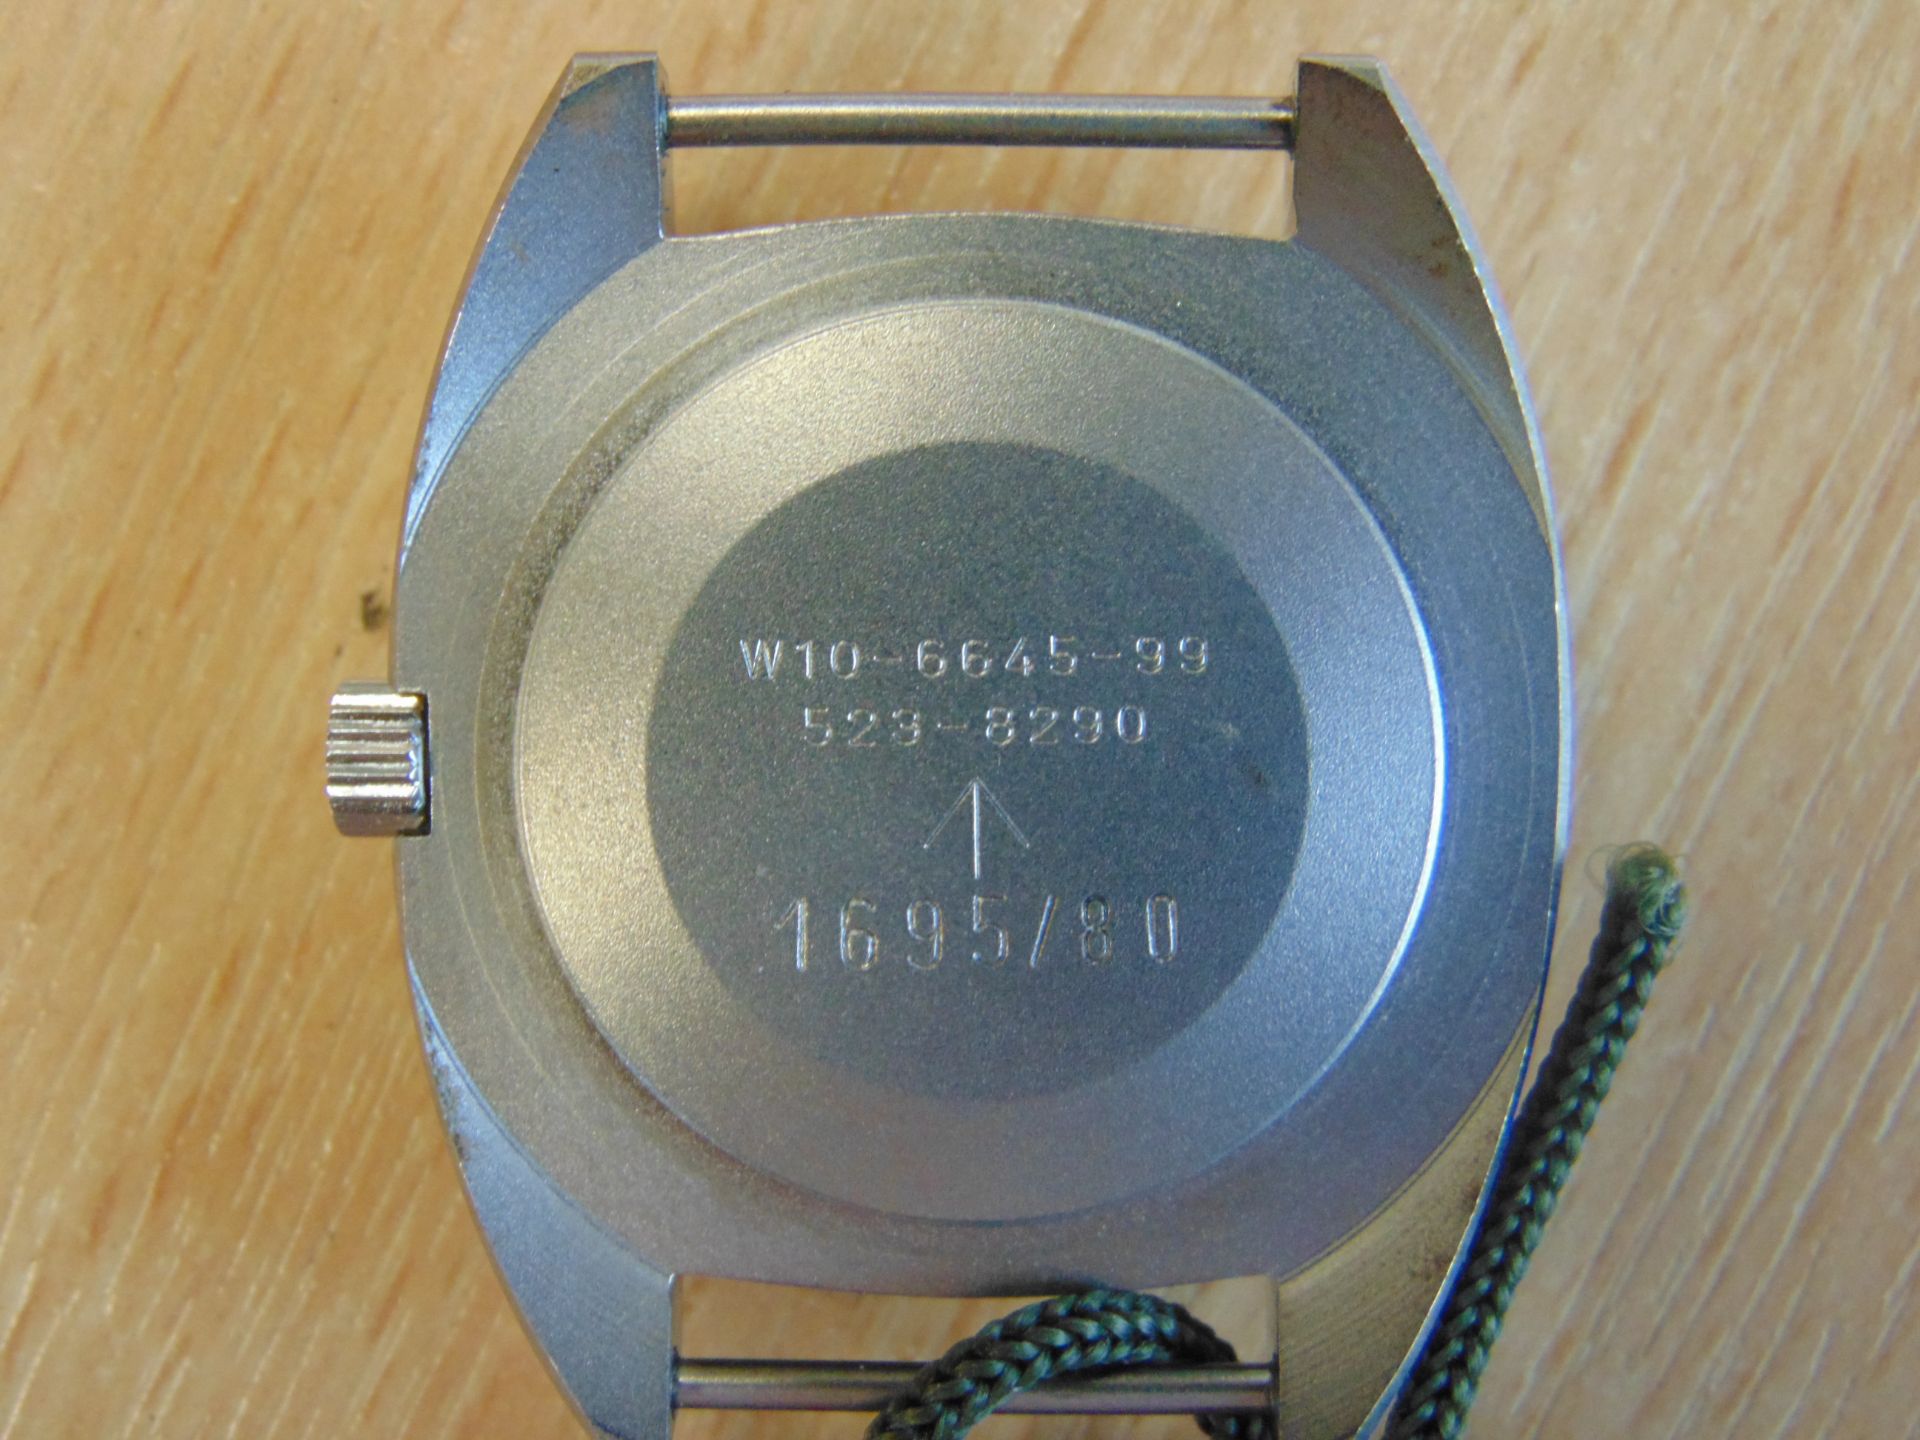 V.V. RARE UNISSUED CWC MECHANICAL W10 BRITISH ARMY SERVICE WATCH NATO MARKINGS DATE 1980 - Image 5 of 5